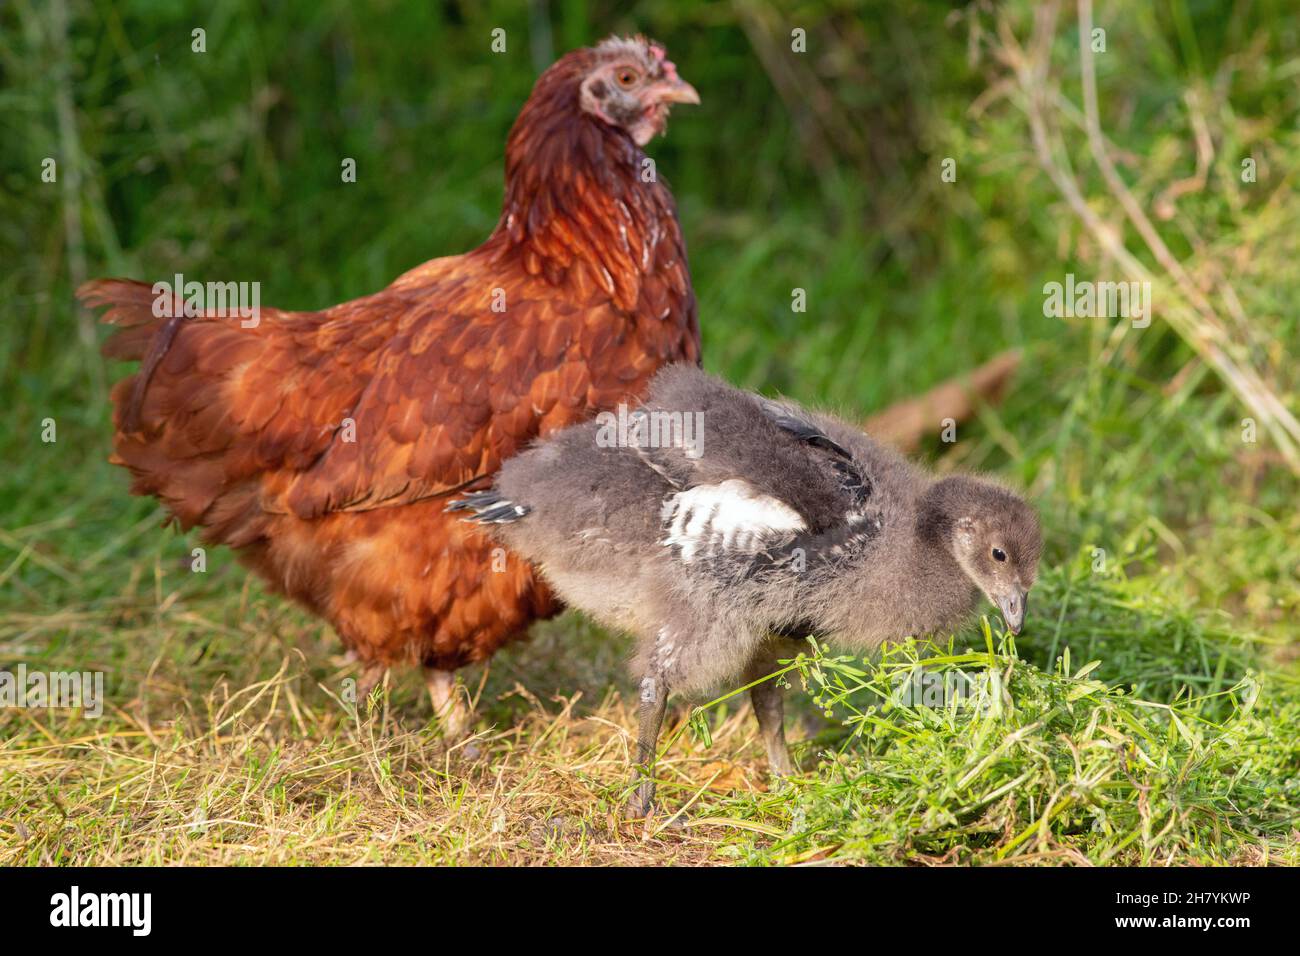 Red-breasted Goose (Branta ruficollis). Immature, juvenile bird, 10days old being foster reared by a domestic broody hen, alongside. Aviculture practi Stock Photo